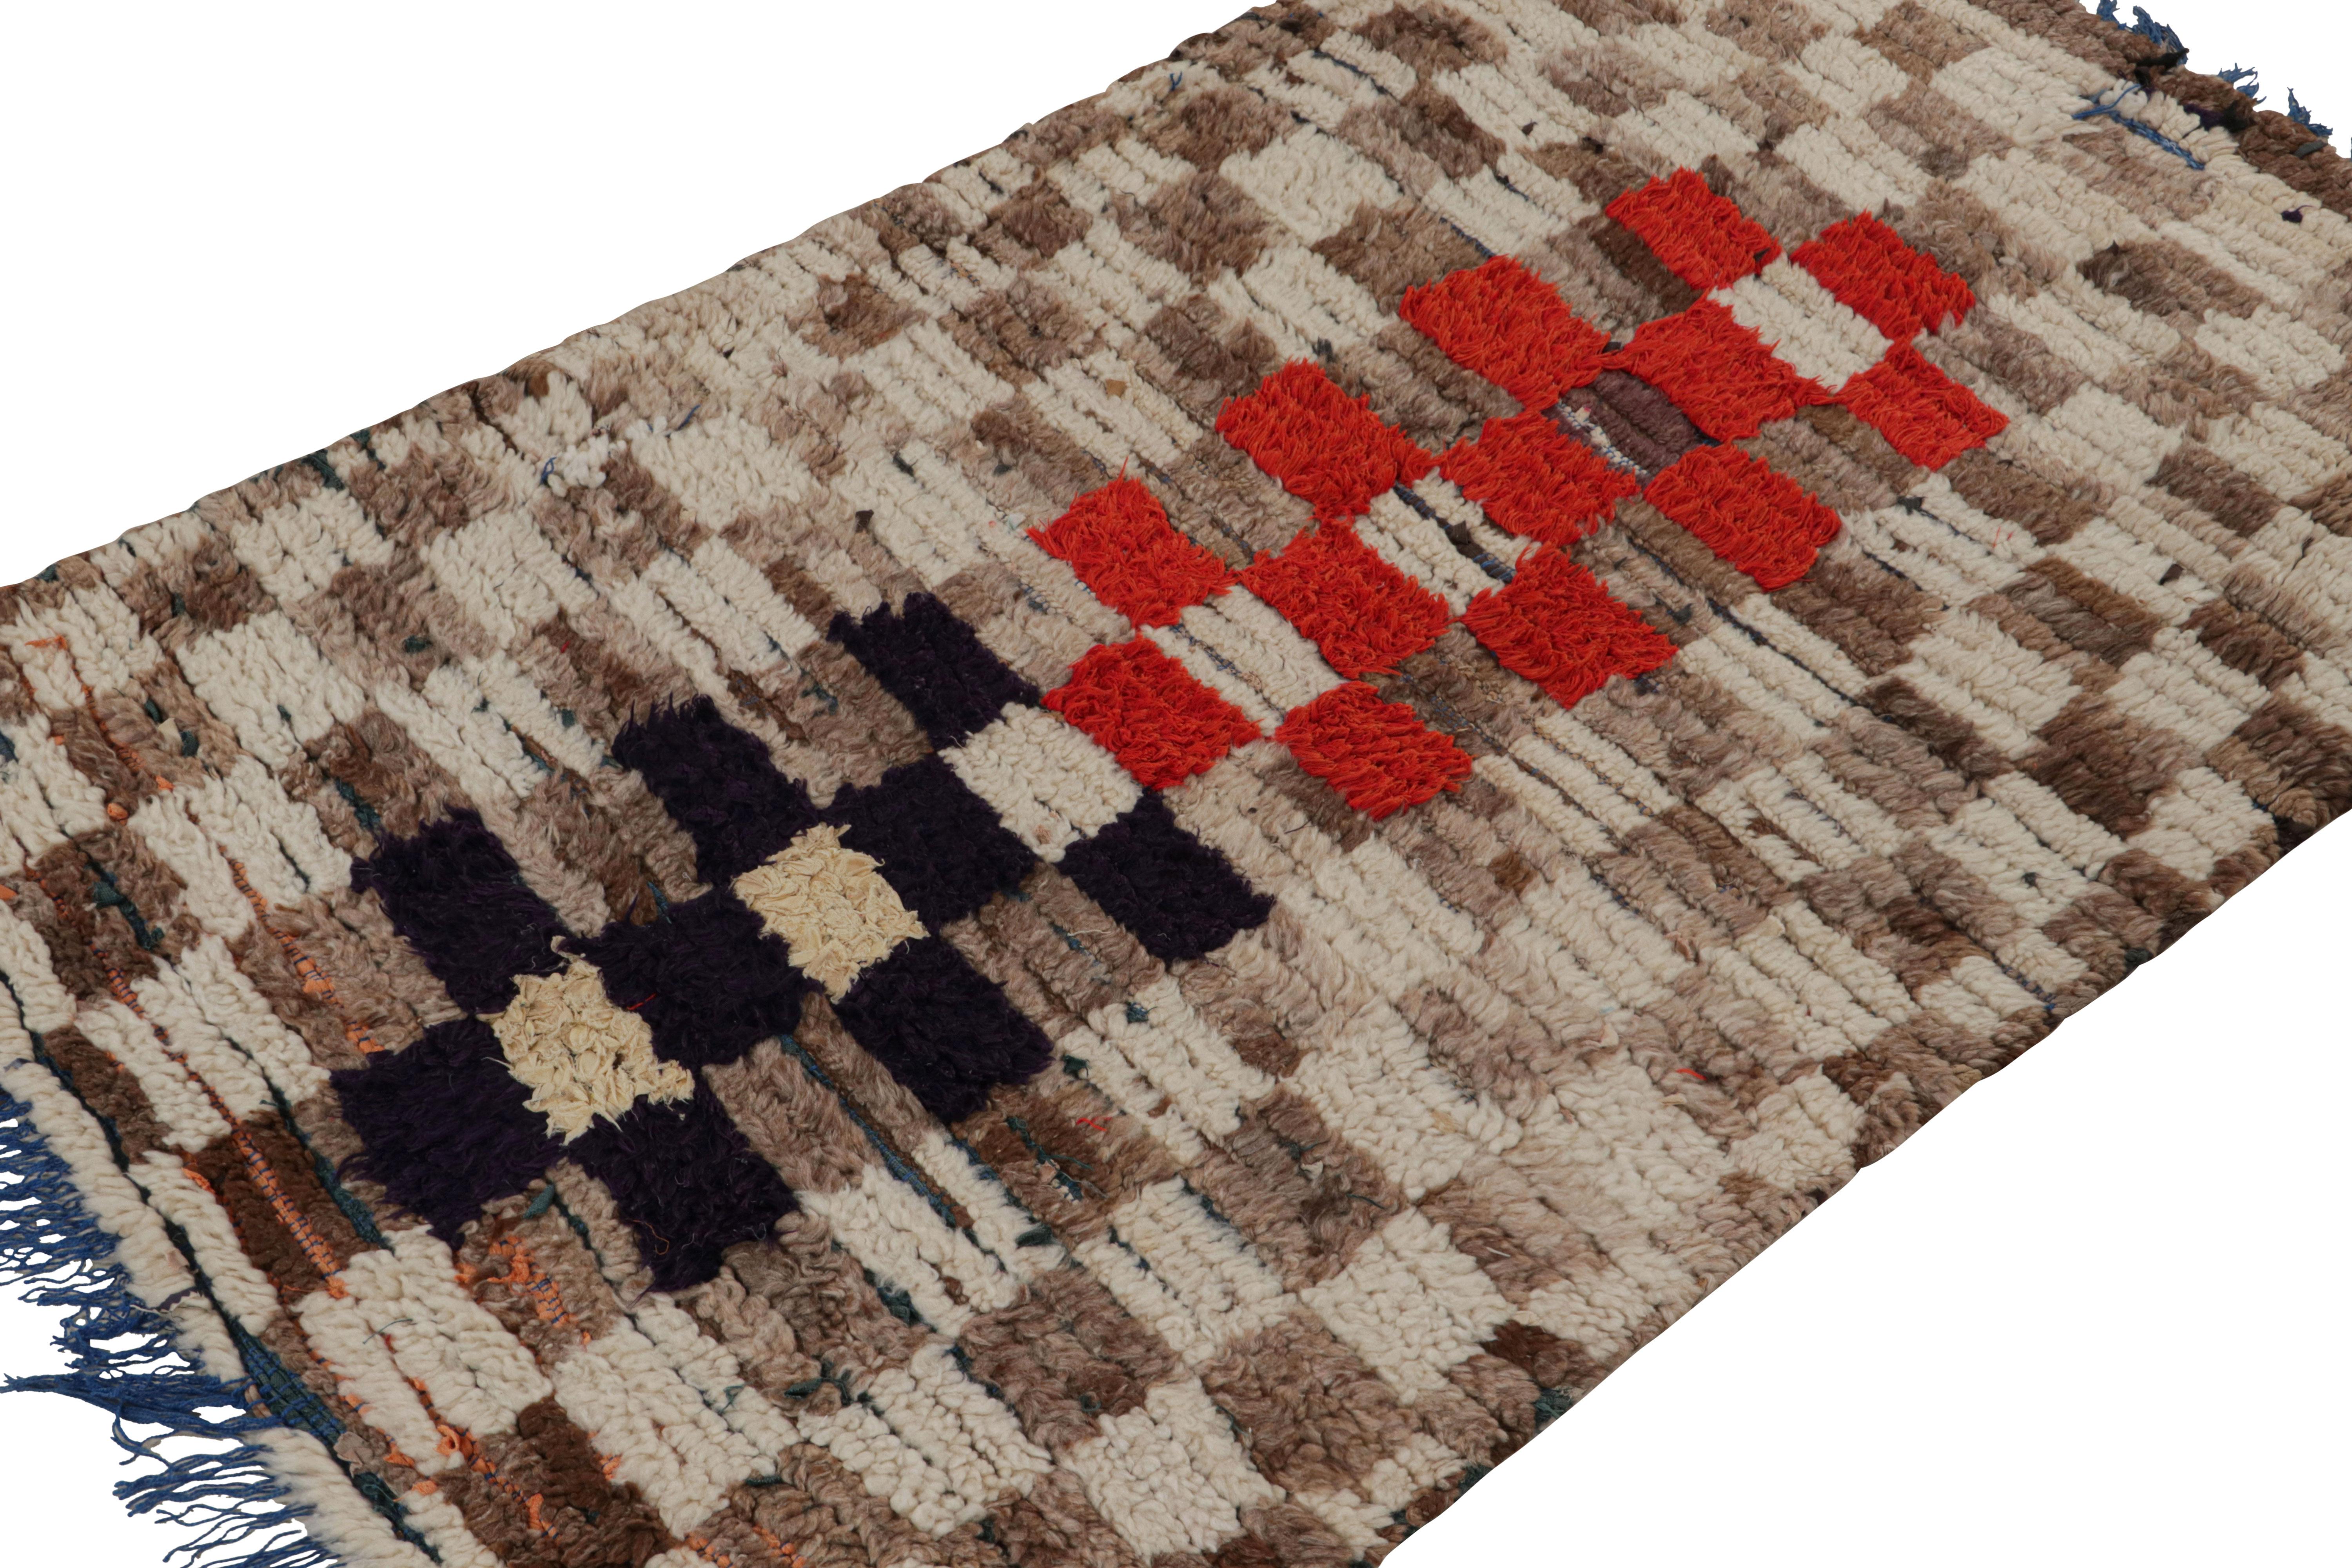 Hand-knotted in wool circa 1950-1960, this 3x5 vintage Moroccan rug with geometric patterns in beige-brown, red and black, hails from the Azilal tribe.  

On the Design: 

Connoisseurs may admire this runner as a bold, graphic piece with drama and